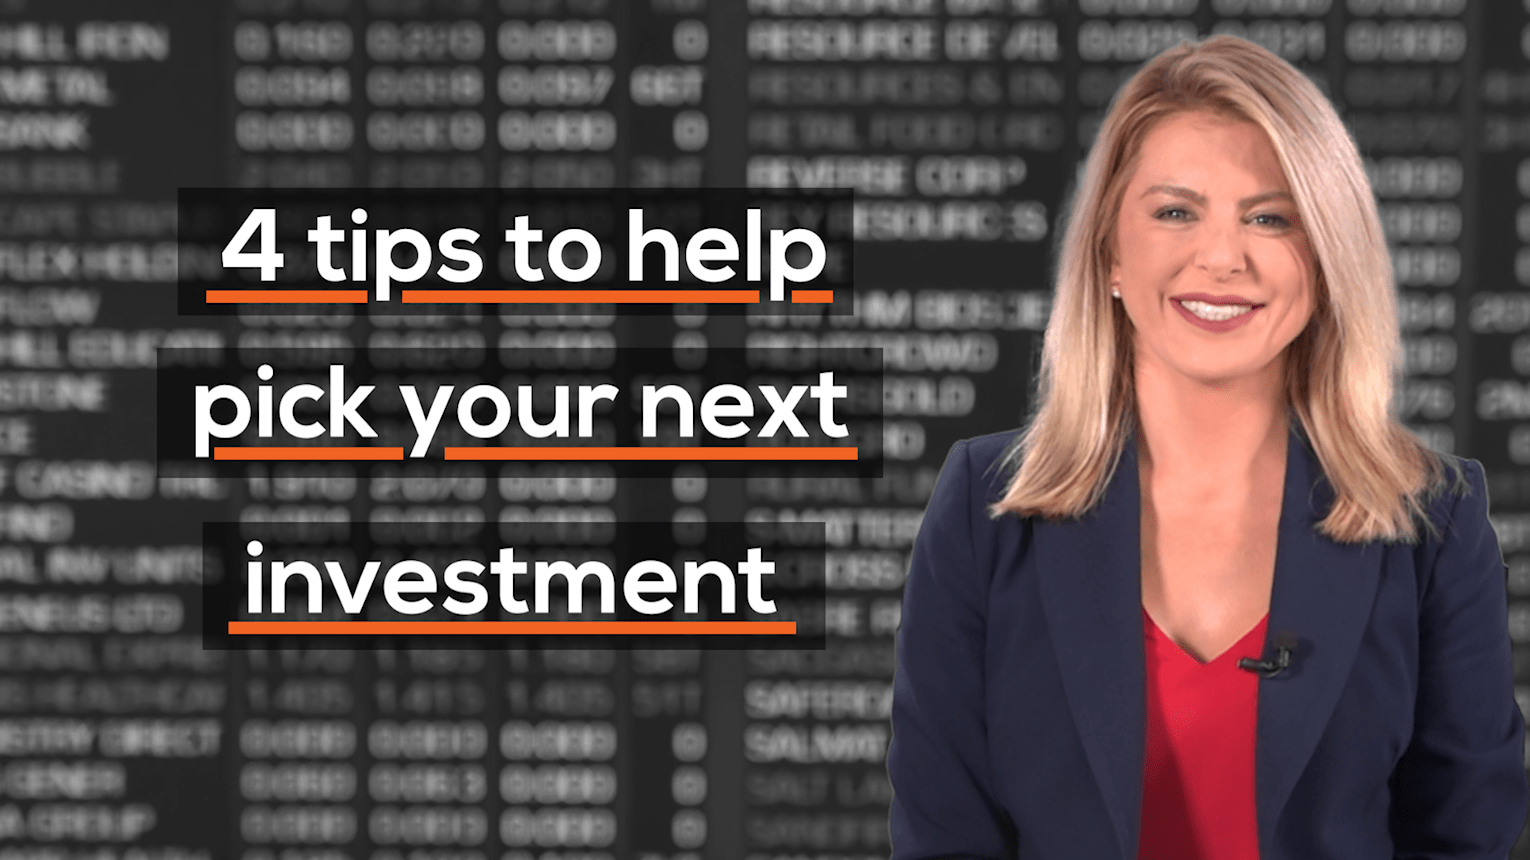 4 tips to help pick your next investment